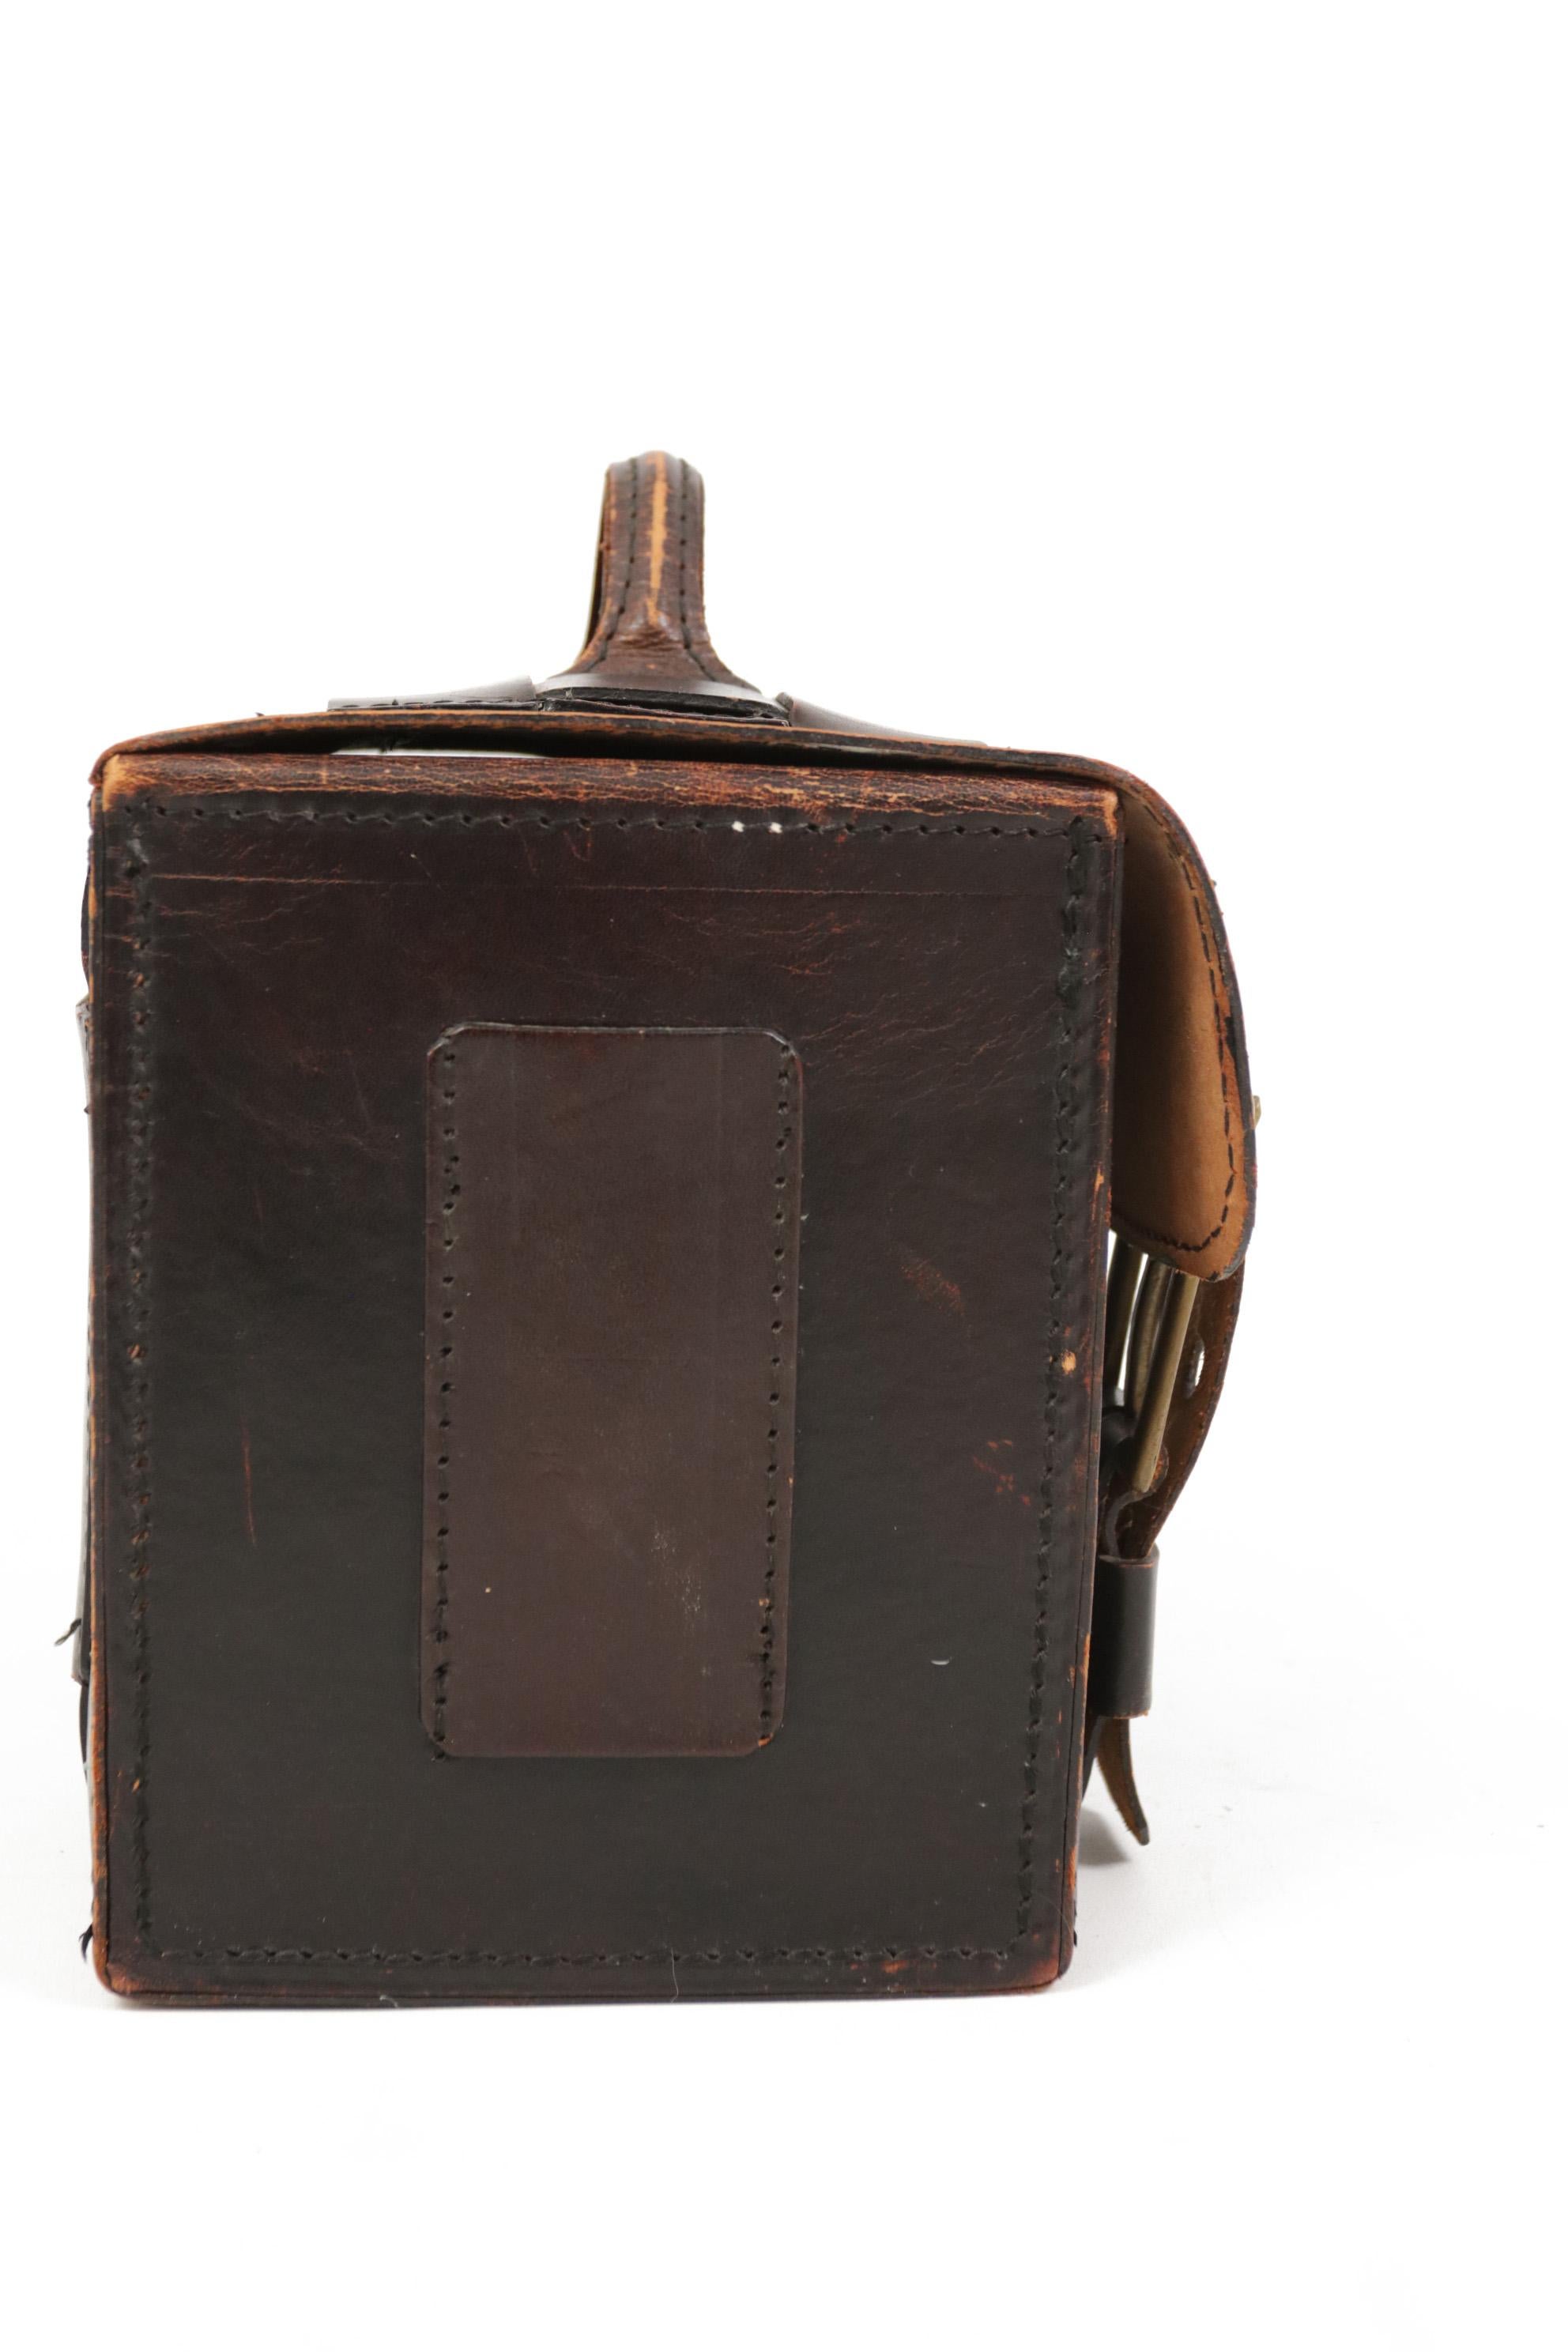 Industrial Design Dutch Harness Leather Tool Case from the 1930s In Good Condition For Sale In Boven Leeuwen, NL